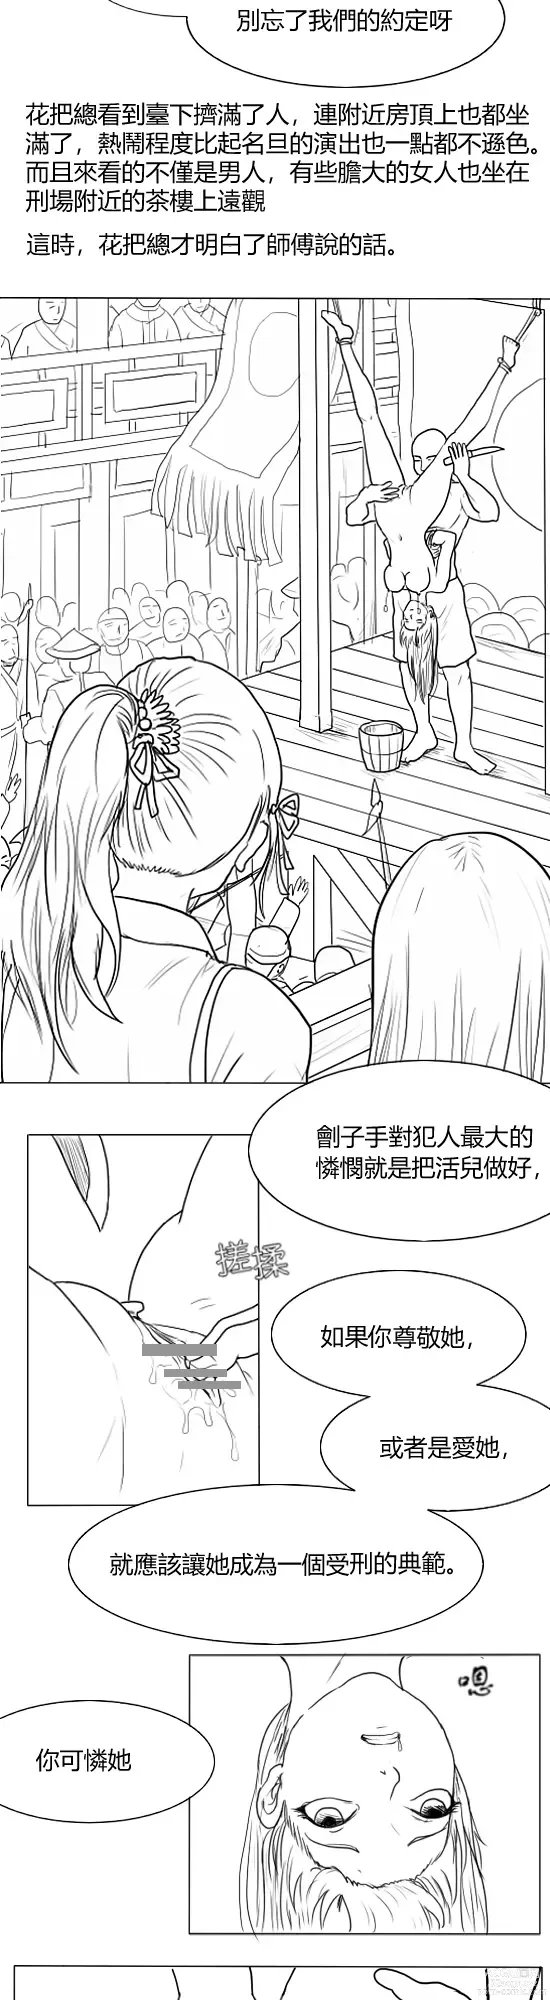 Page 8 of doujinshi 落英  第一话